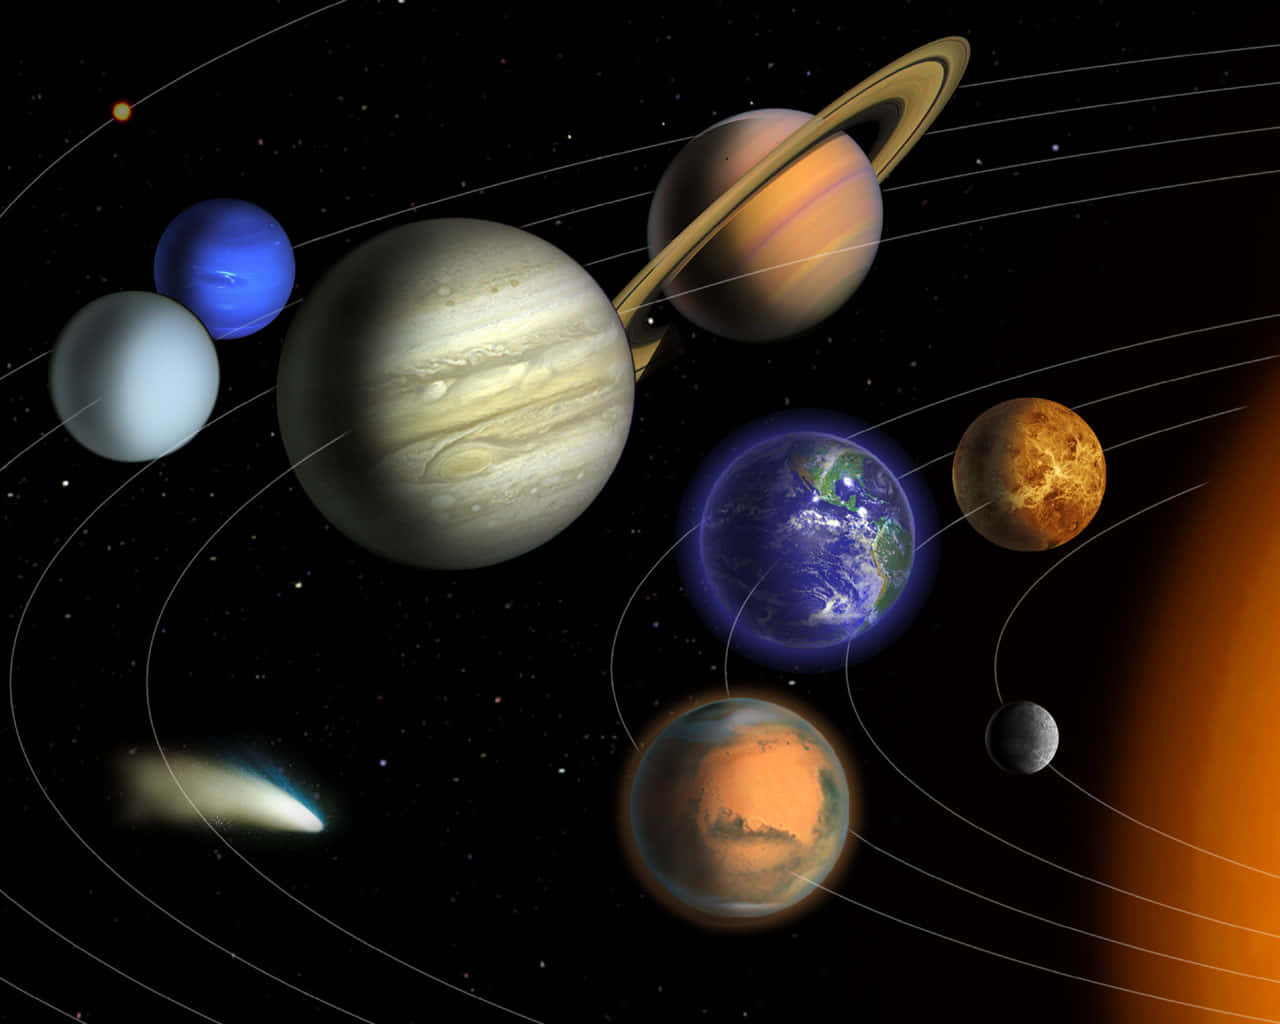 Explore the wonders of our Solar System